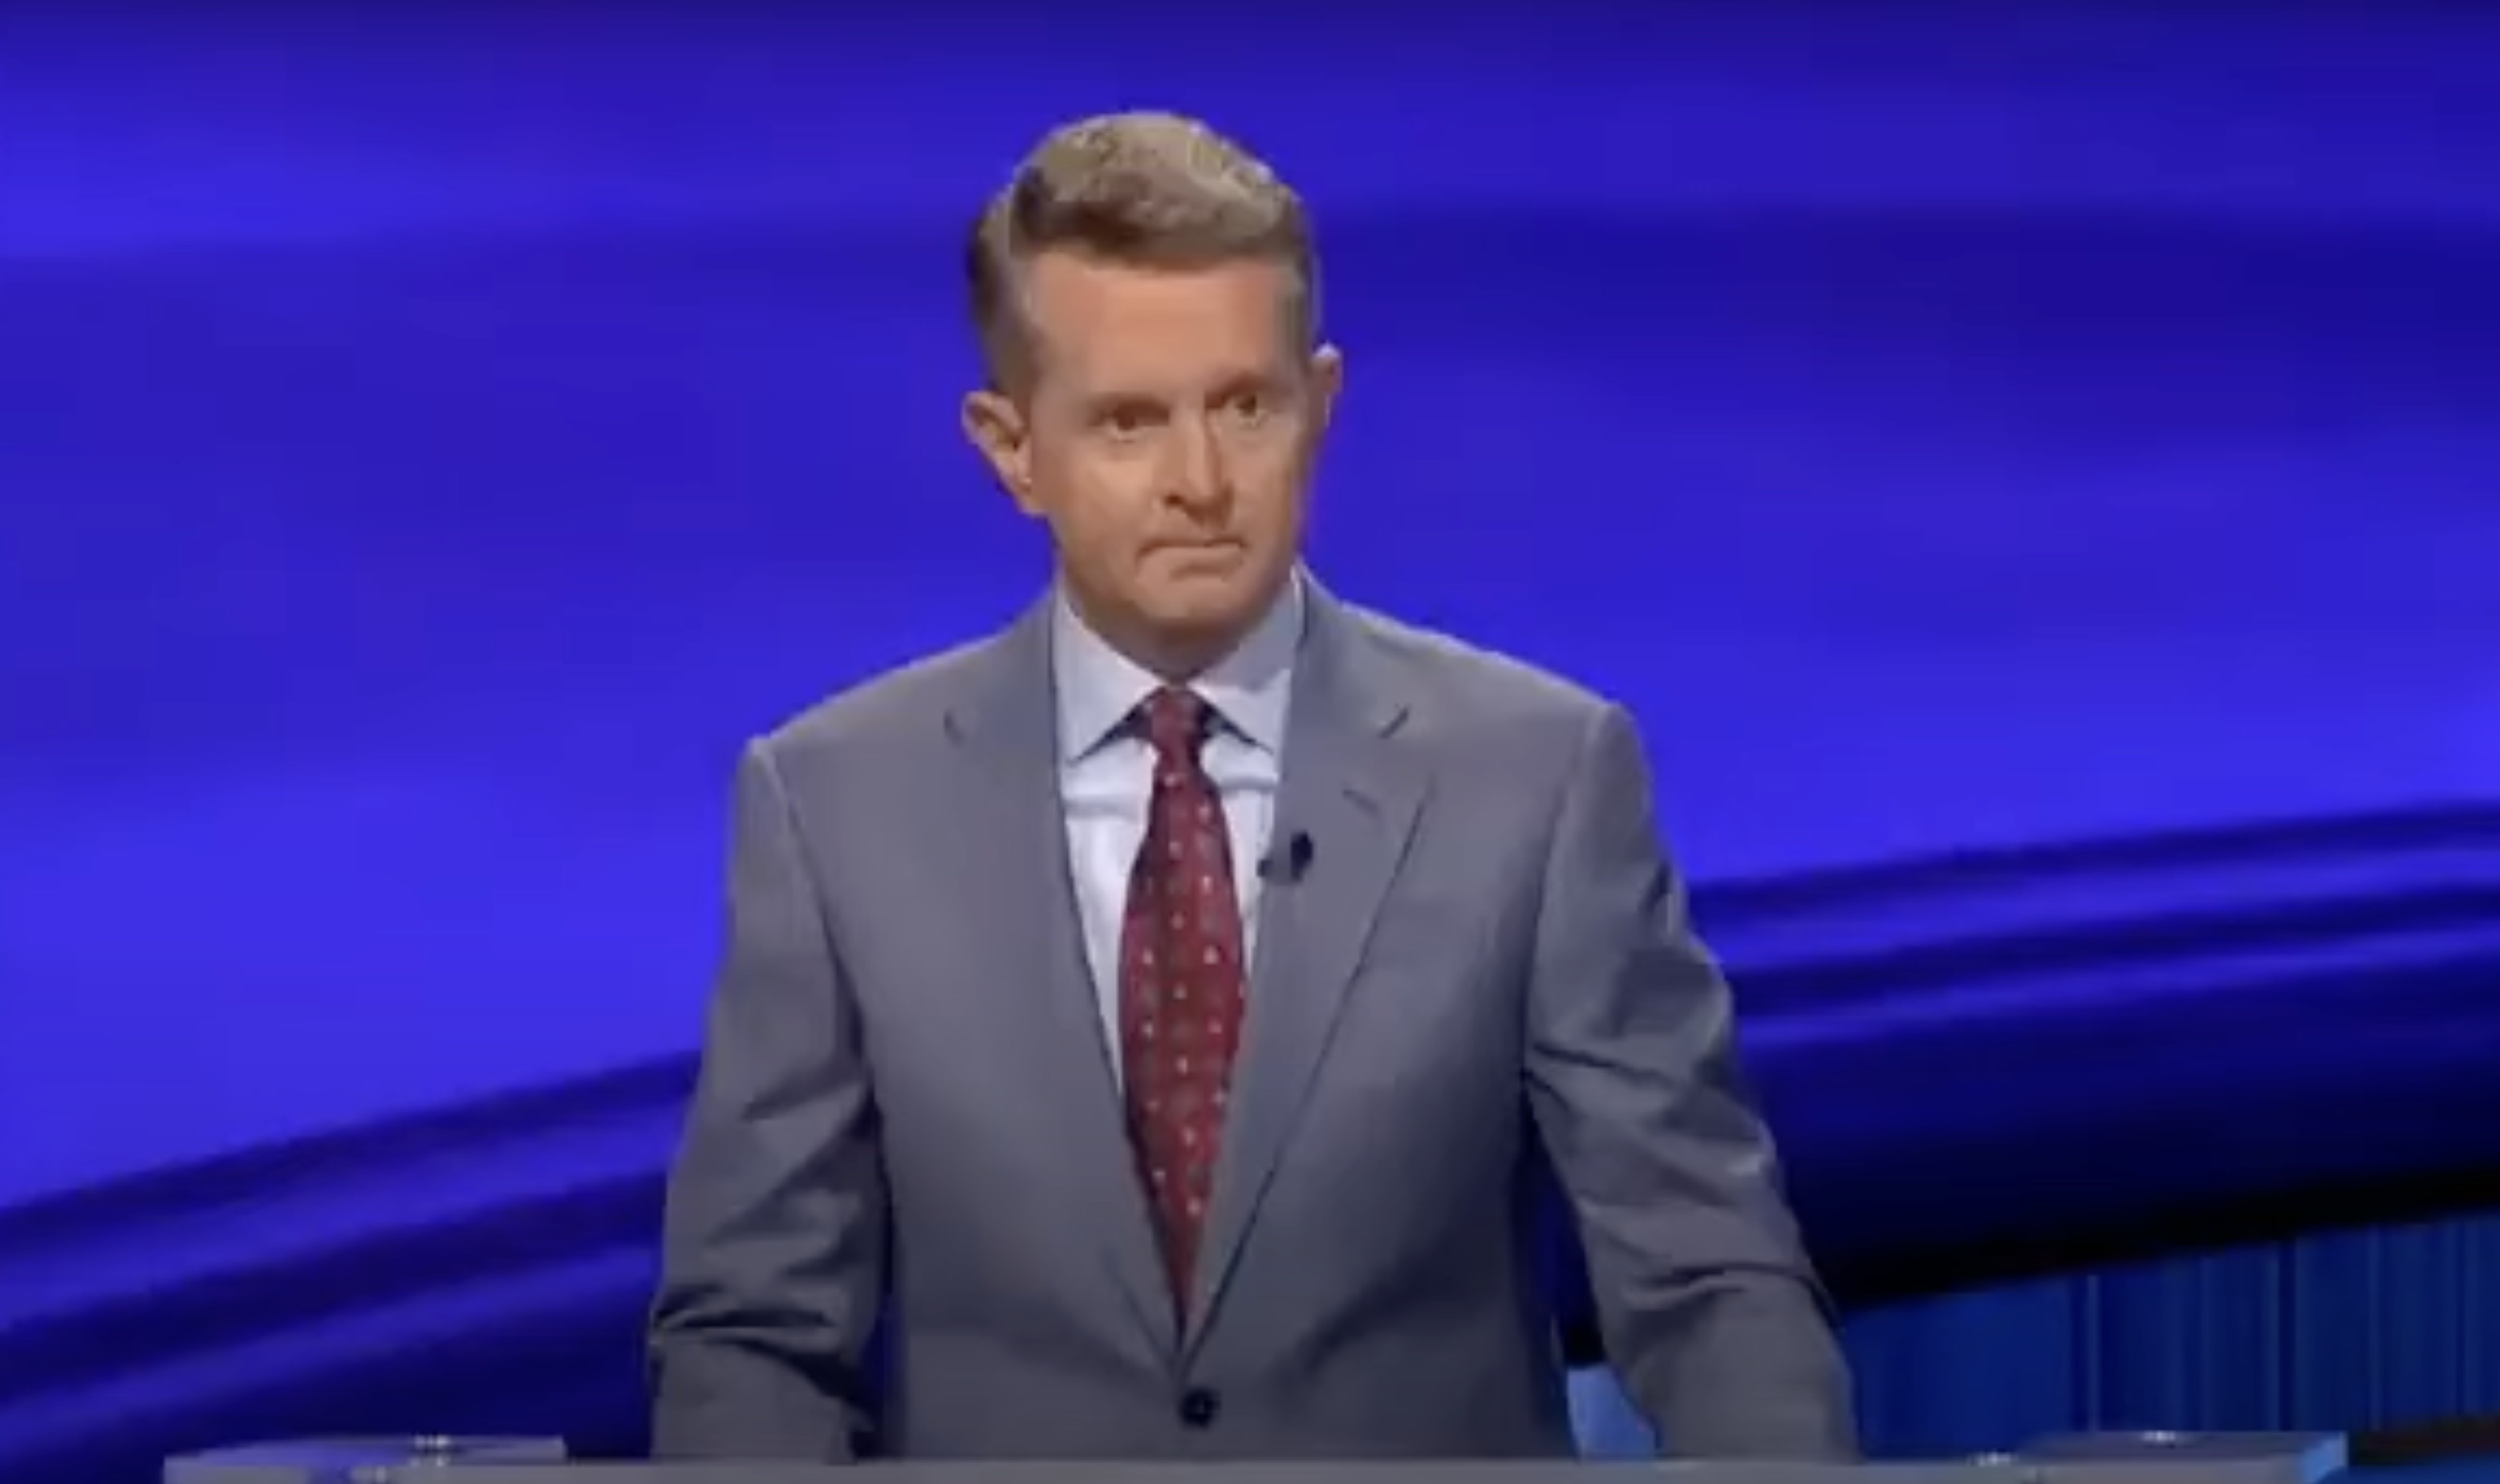 Ken revealed on an episode of Jeopardy! that it was difficult hosting the show